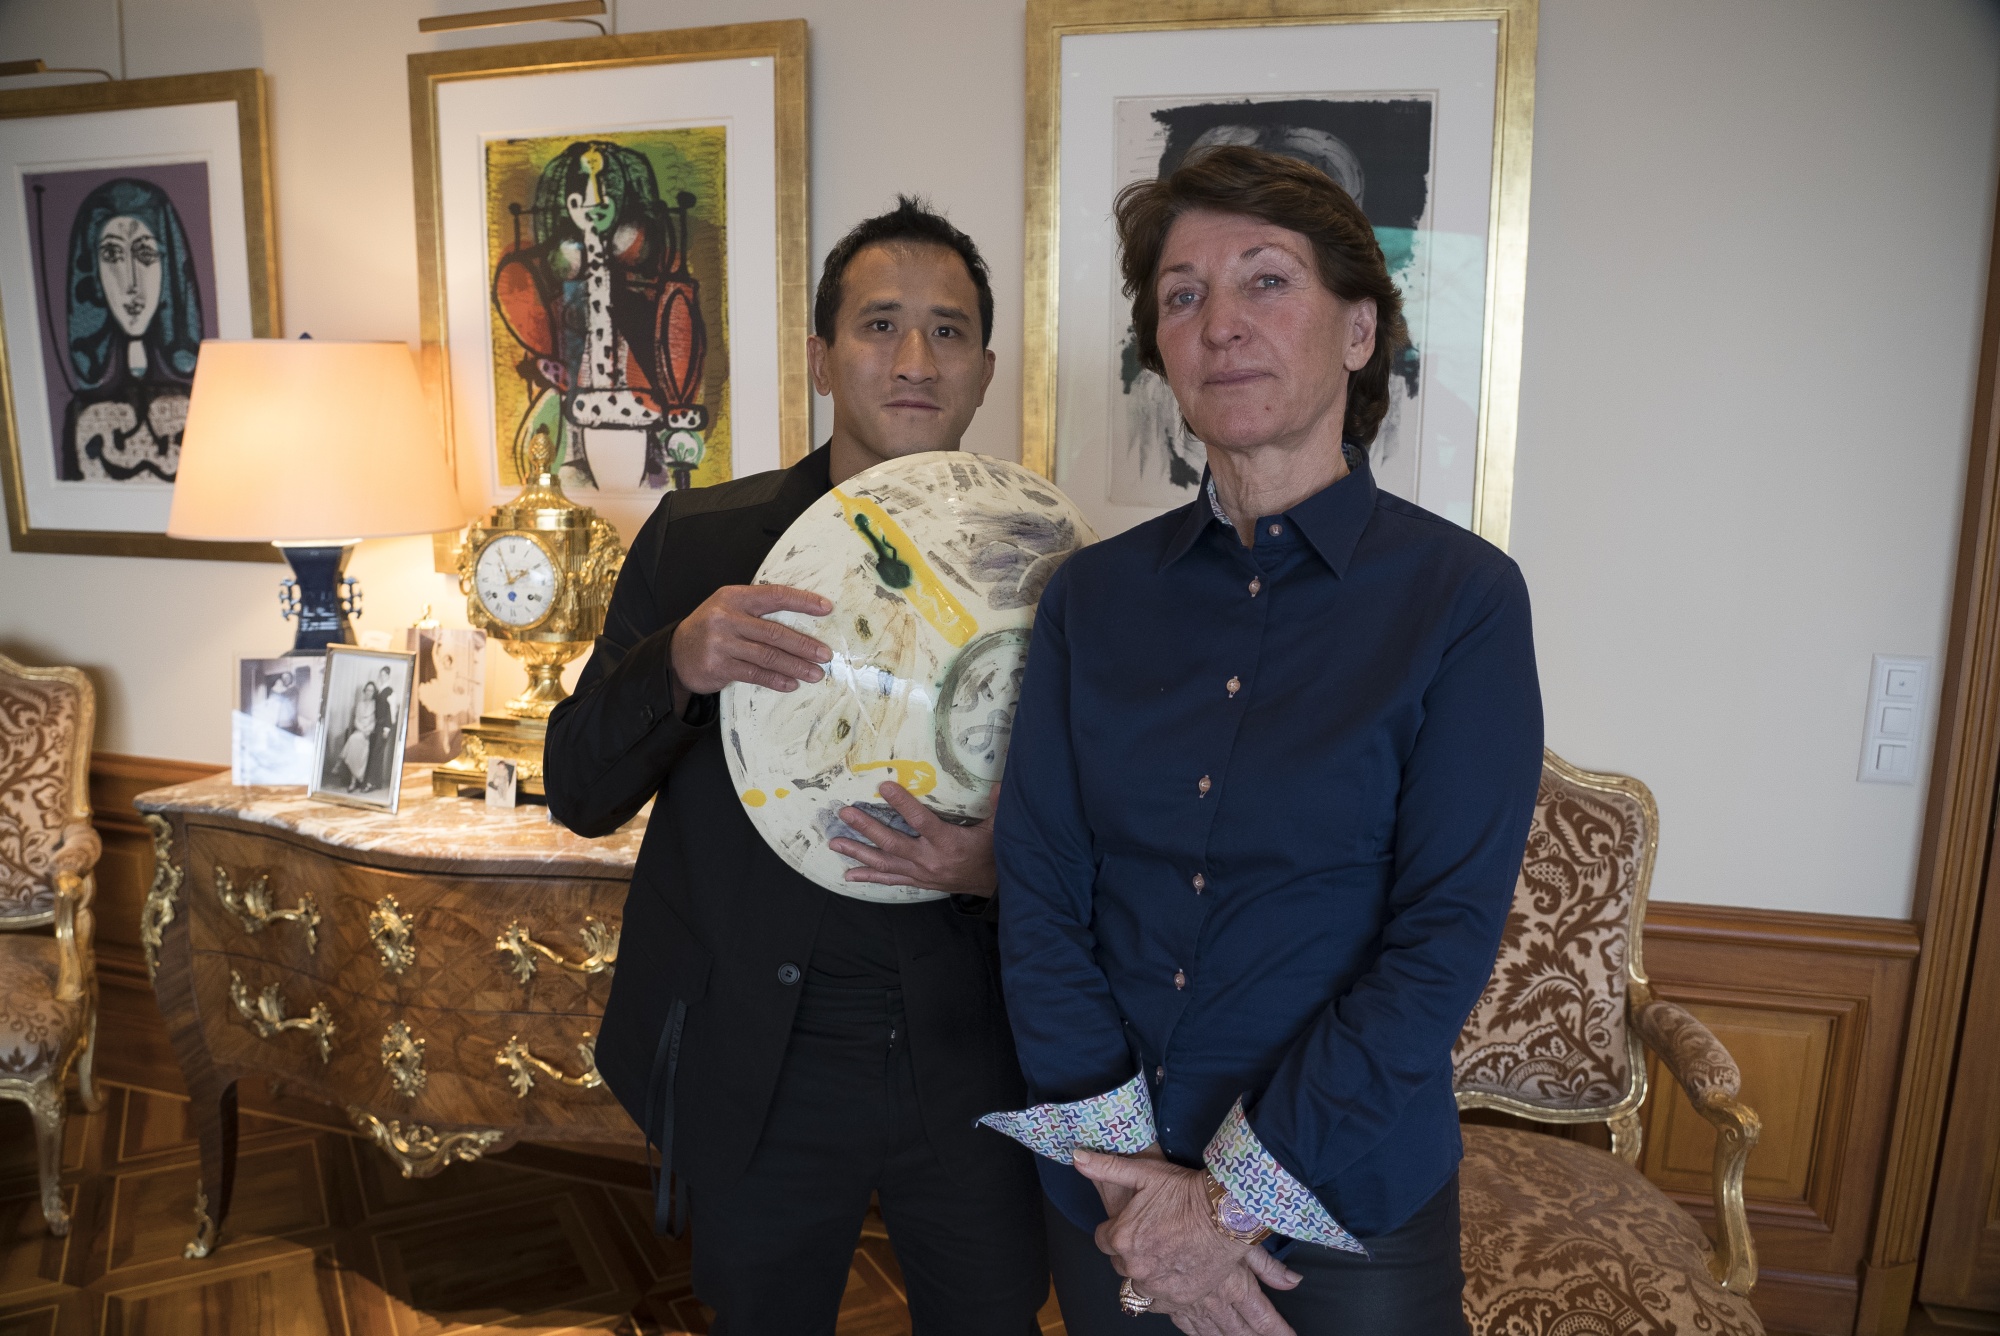 Marina Picasso, right, granddaughter of artist Pablo Picasso, and her son Florian Picasso pose with a ceramic artwork of Pablo Picasso in Cologny near in Geneva on Jan. 25.